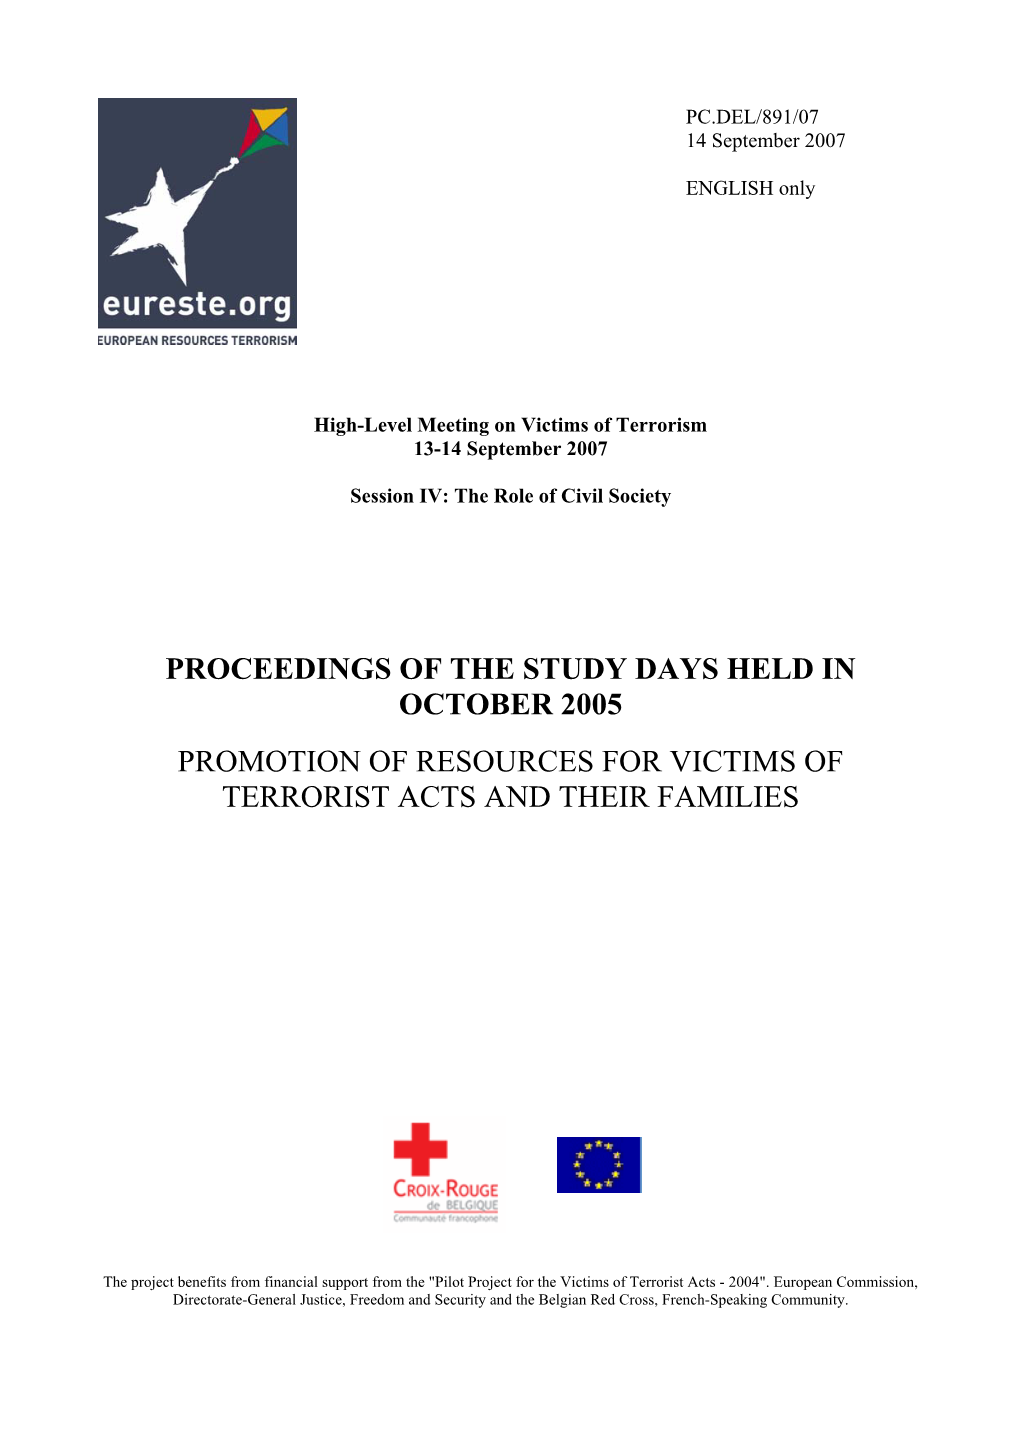 Proceedings of the Study Days Held in October 2005